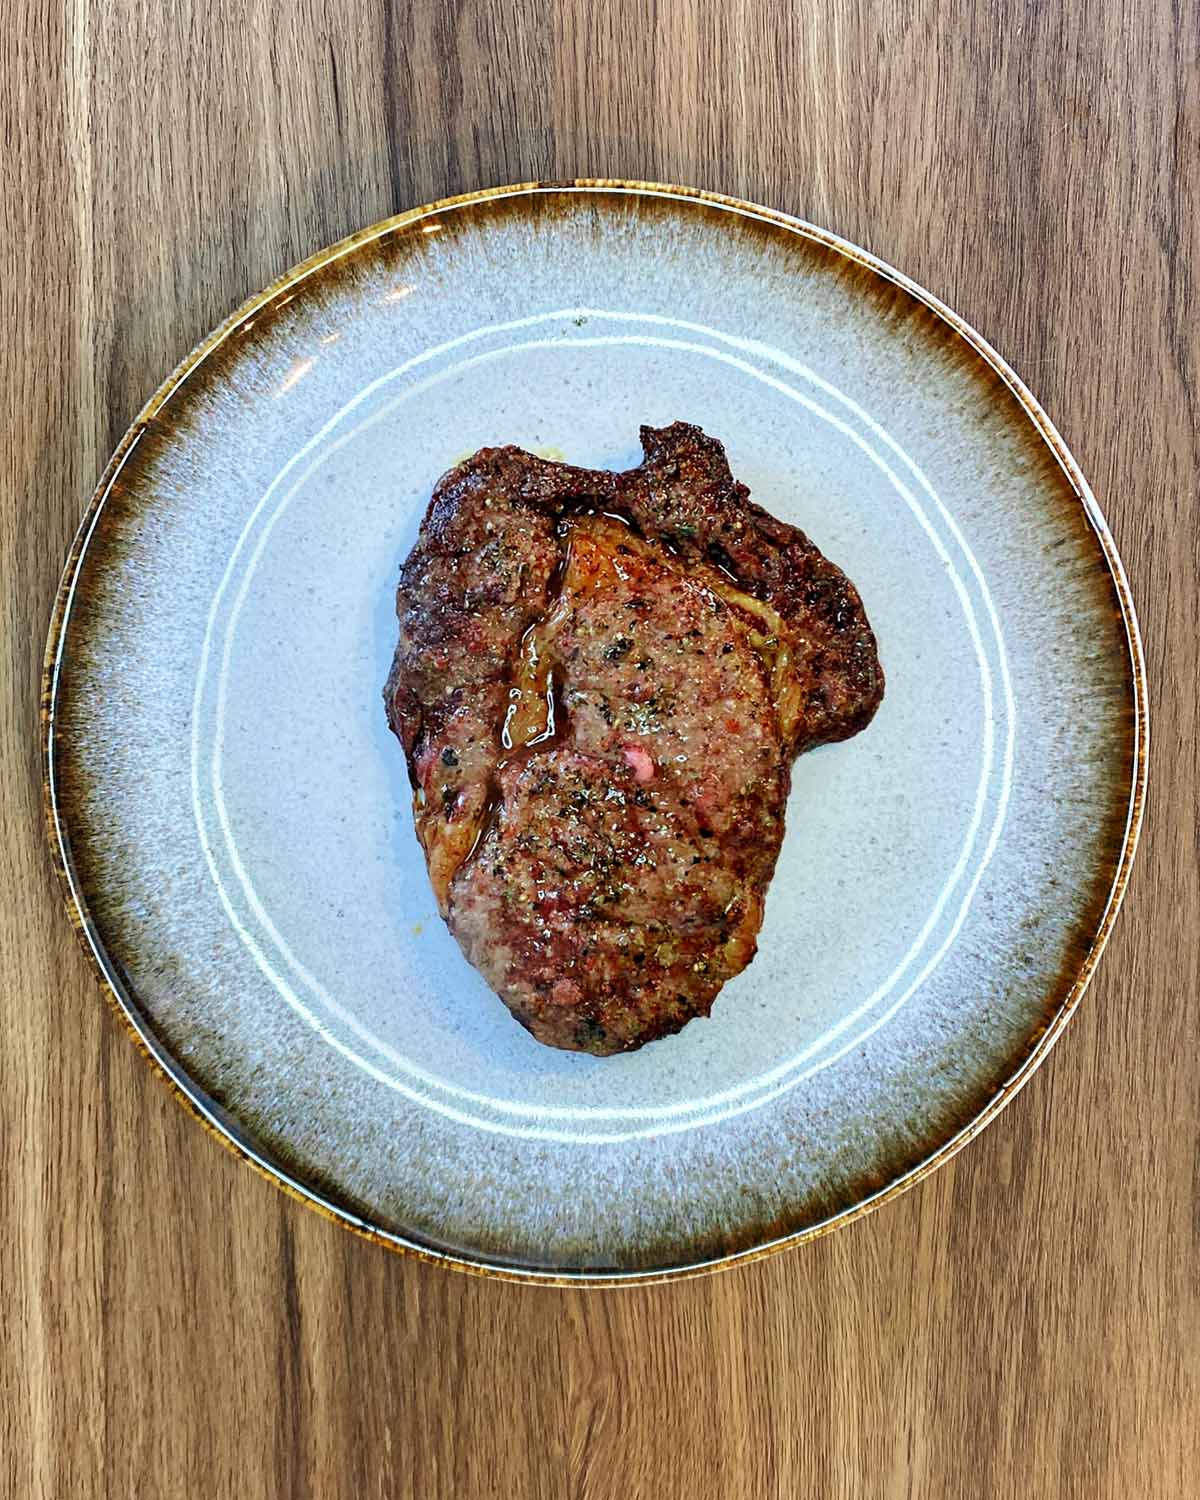 A cooked steak on a blue plate.